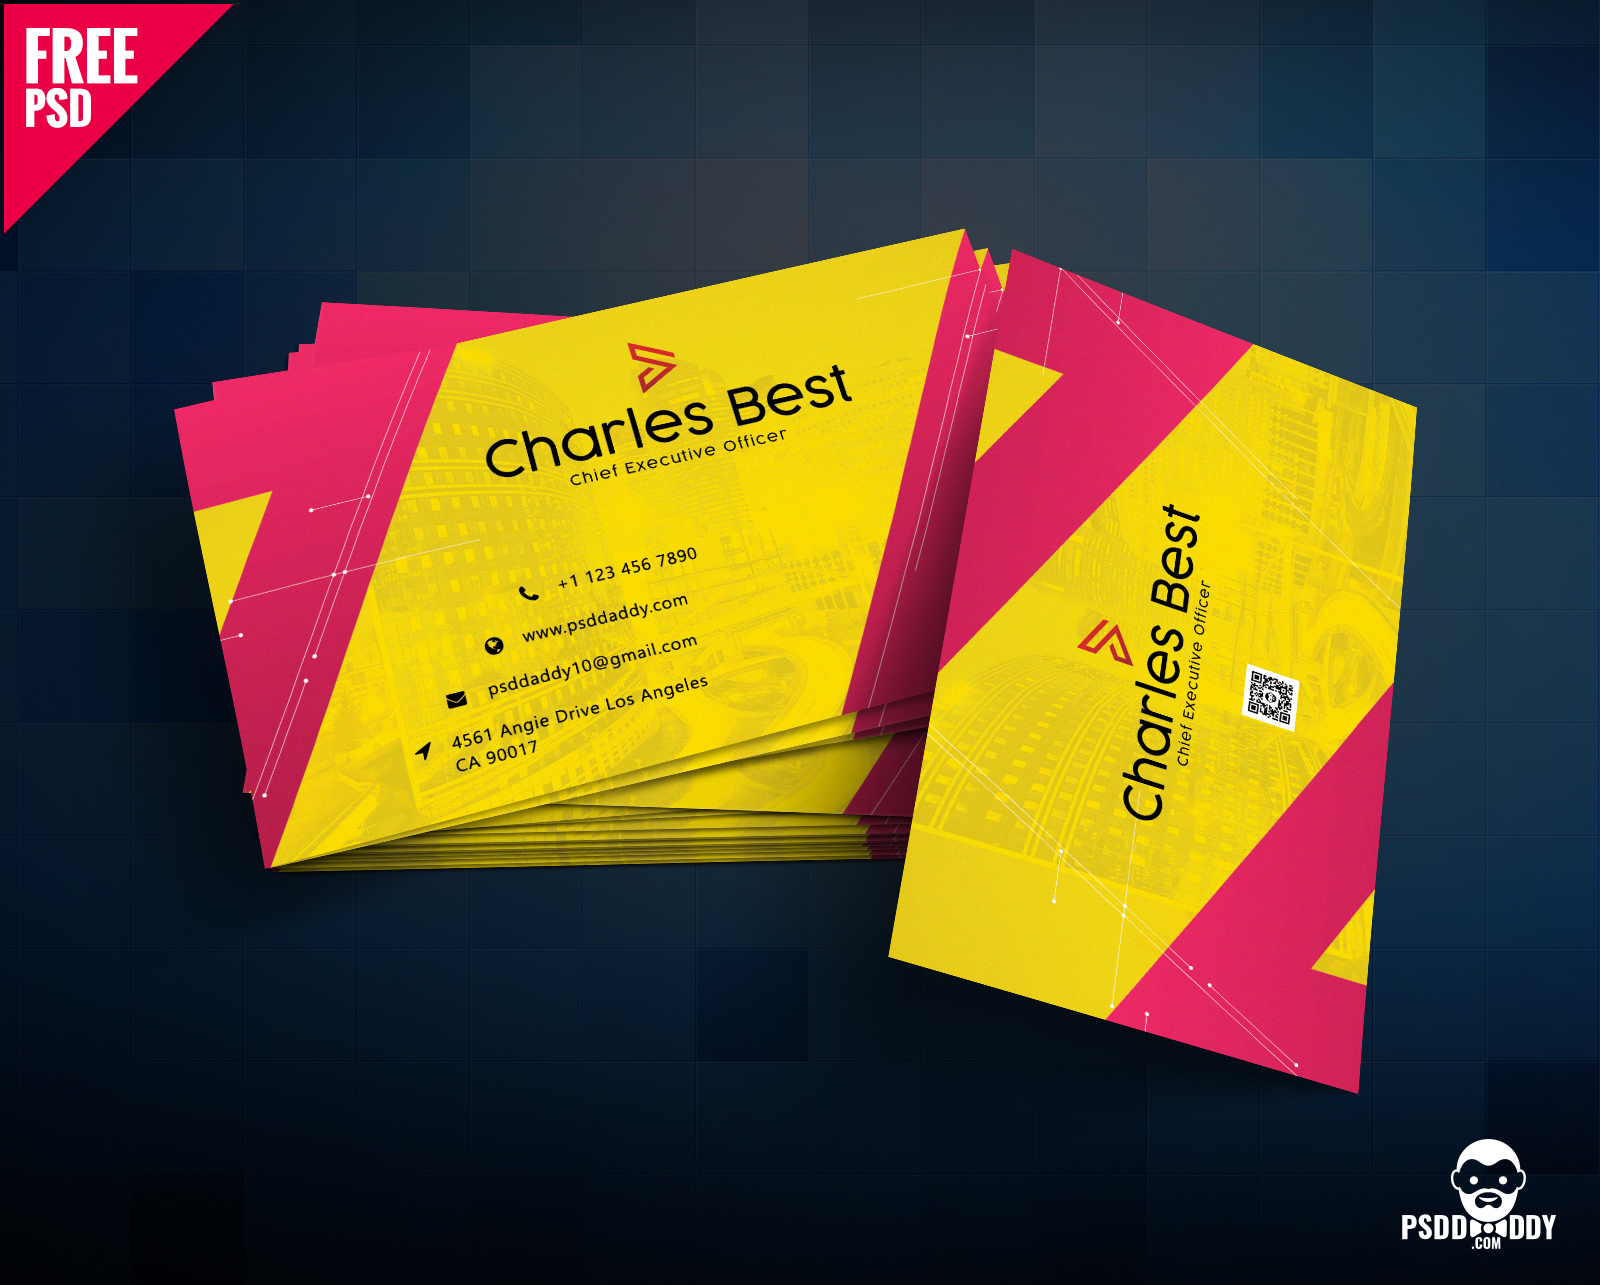 Download] Creative Business Card Free Psd | Psddaddy Within Visiting Card Psd Template Free Download